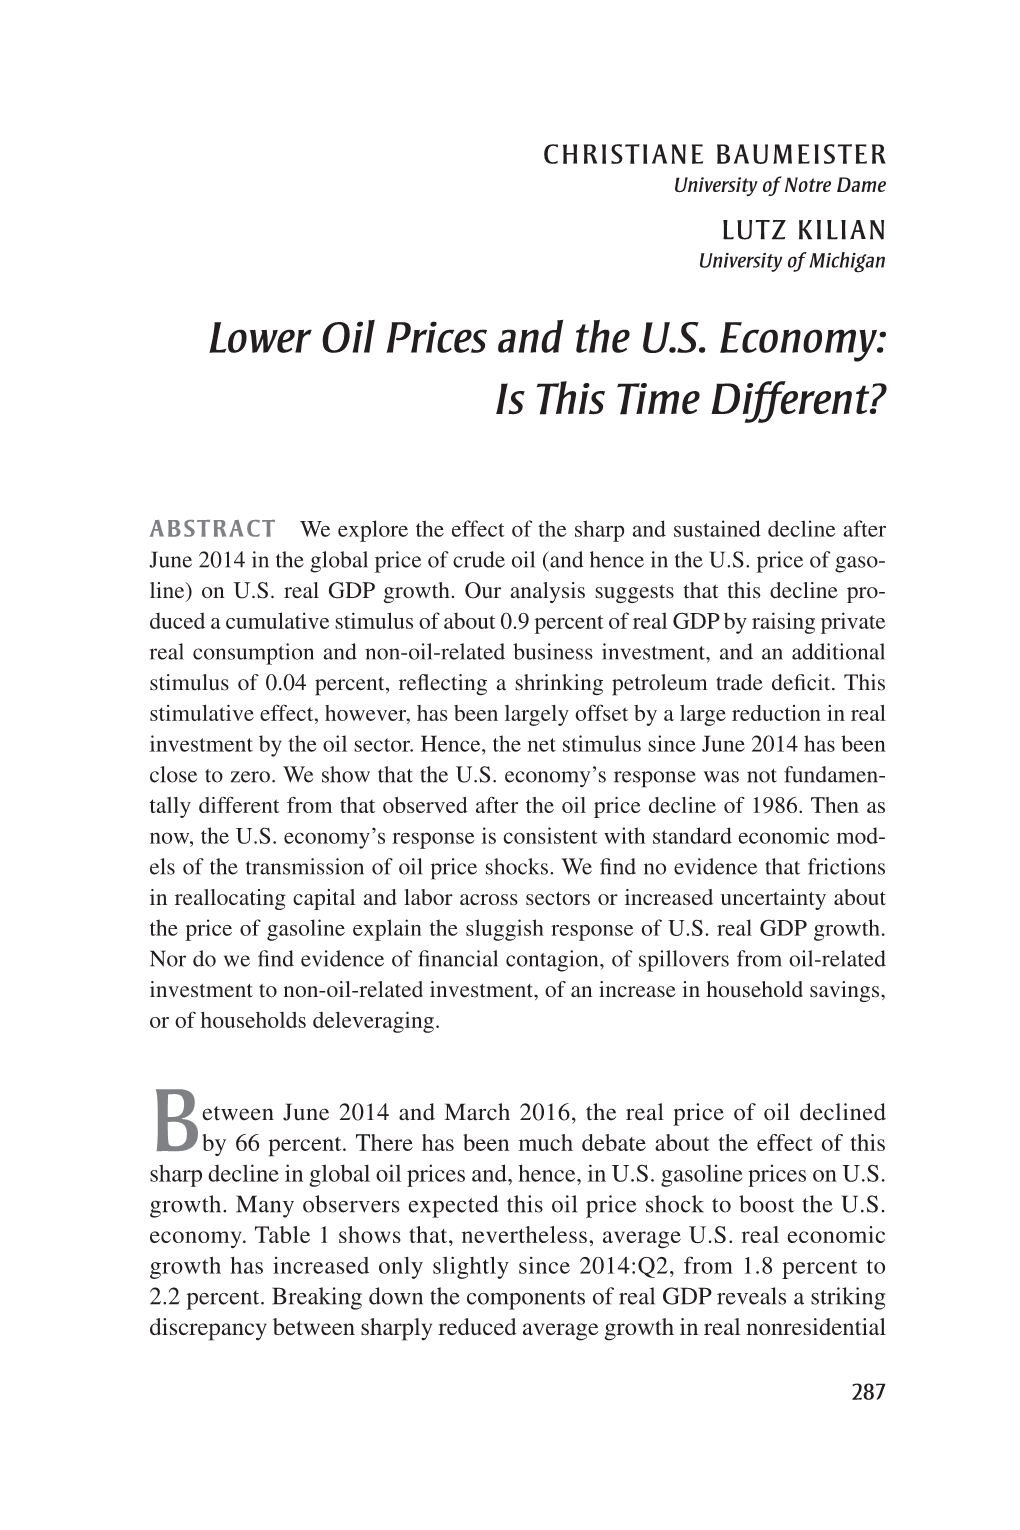 Lower Oil Prices and the US Economy